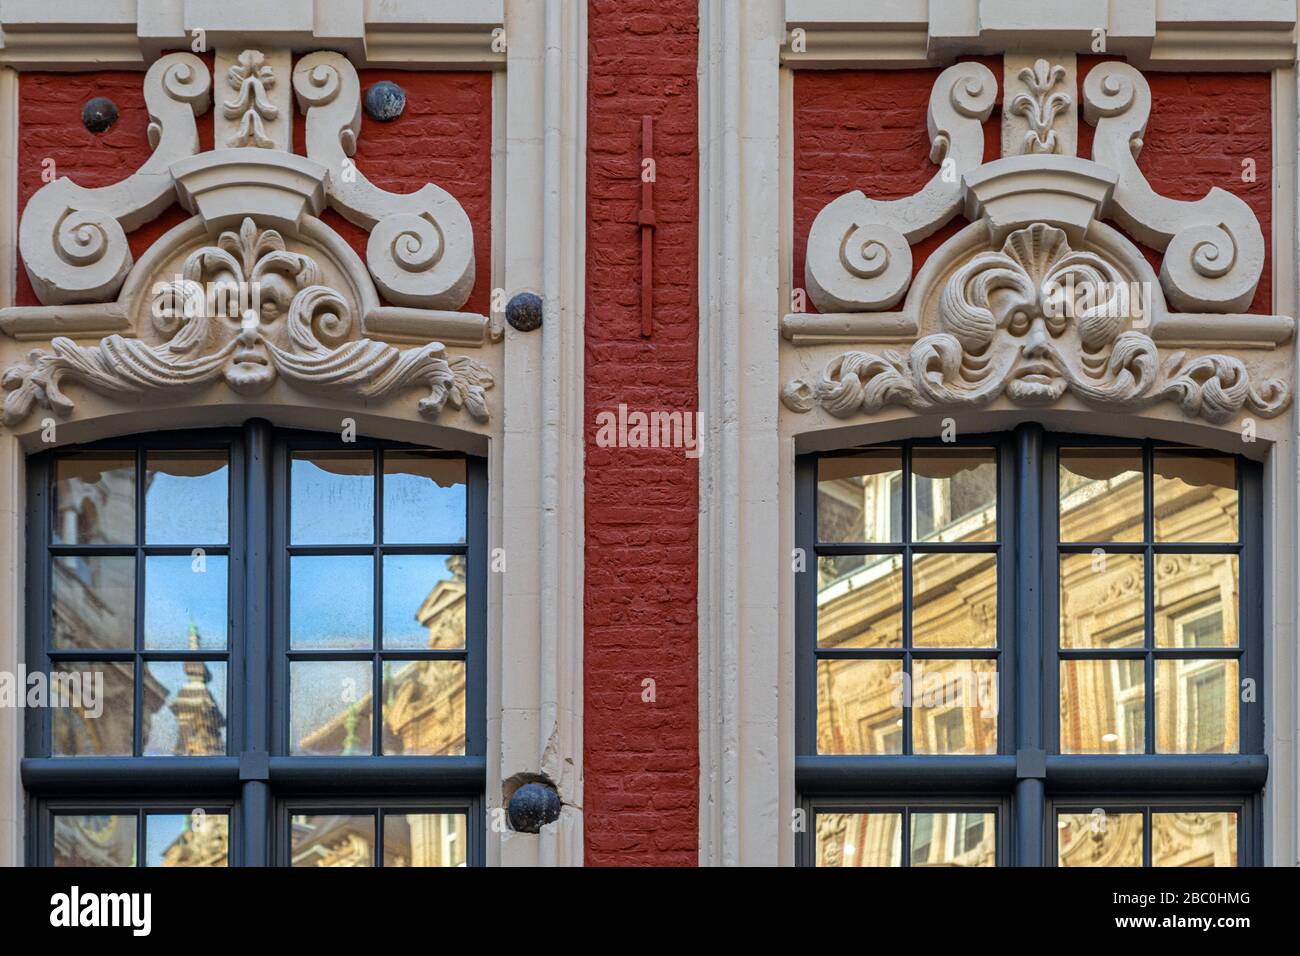 DECORATIVE MASCARON, FACADE OF A BUILDING LISTED AS A HISTORICAL MONUMENT, RUE DE LA BOURSE, OLD LILLE NEAR THE GRAND'PLACE,  LILLE, NORD, FRANCE Stock Photo